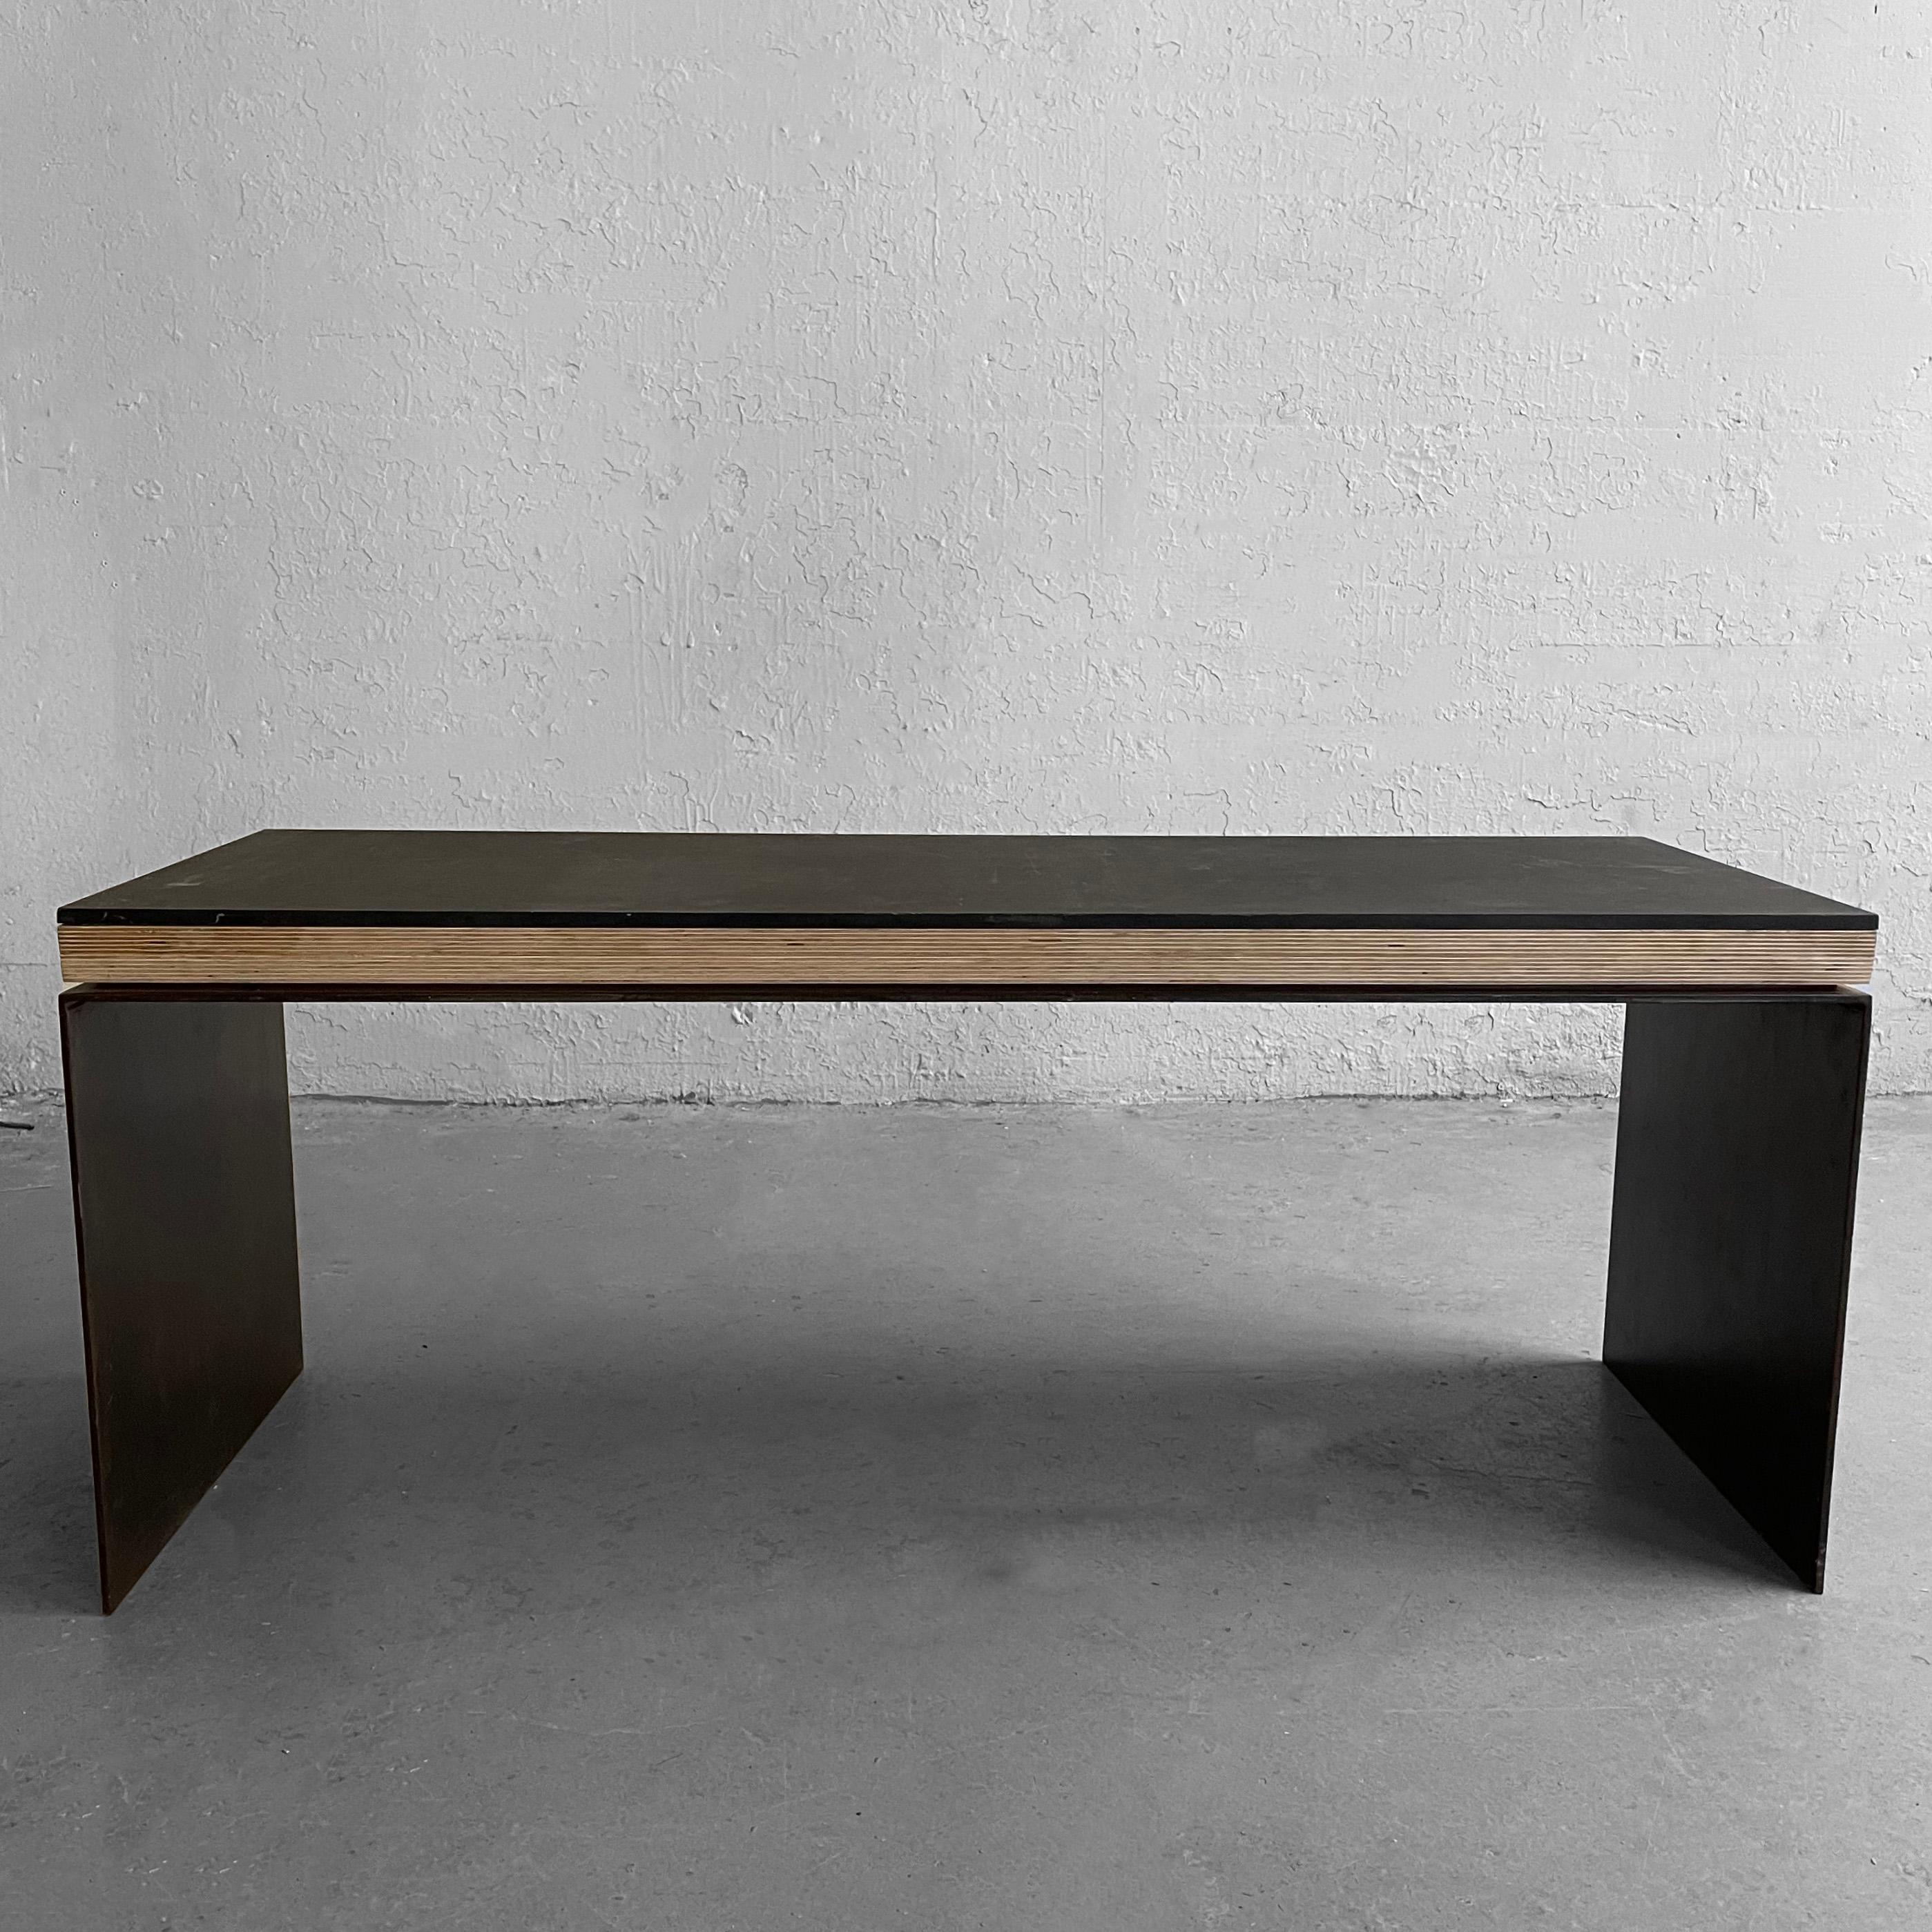 Well crafted, artisan-made, industrial coffee table or bench features a patinated steel base with natural, marine plywood and black acrylic top.